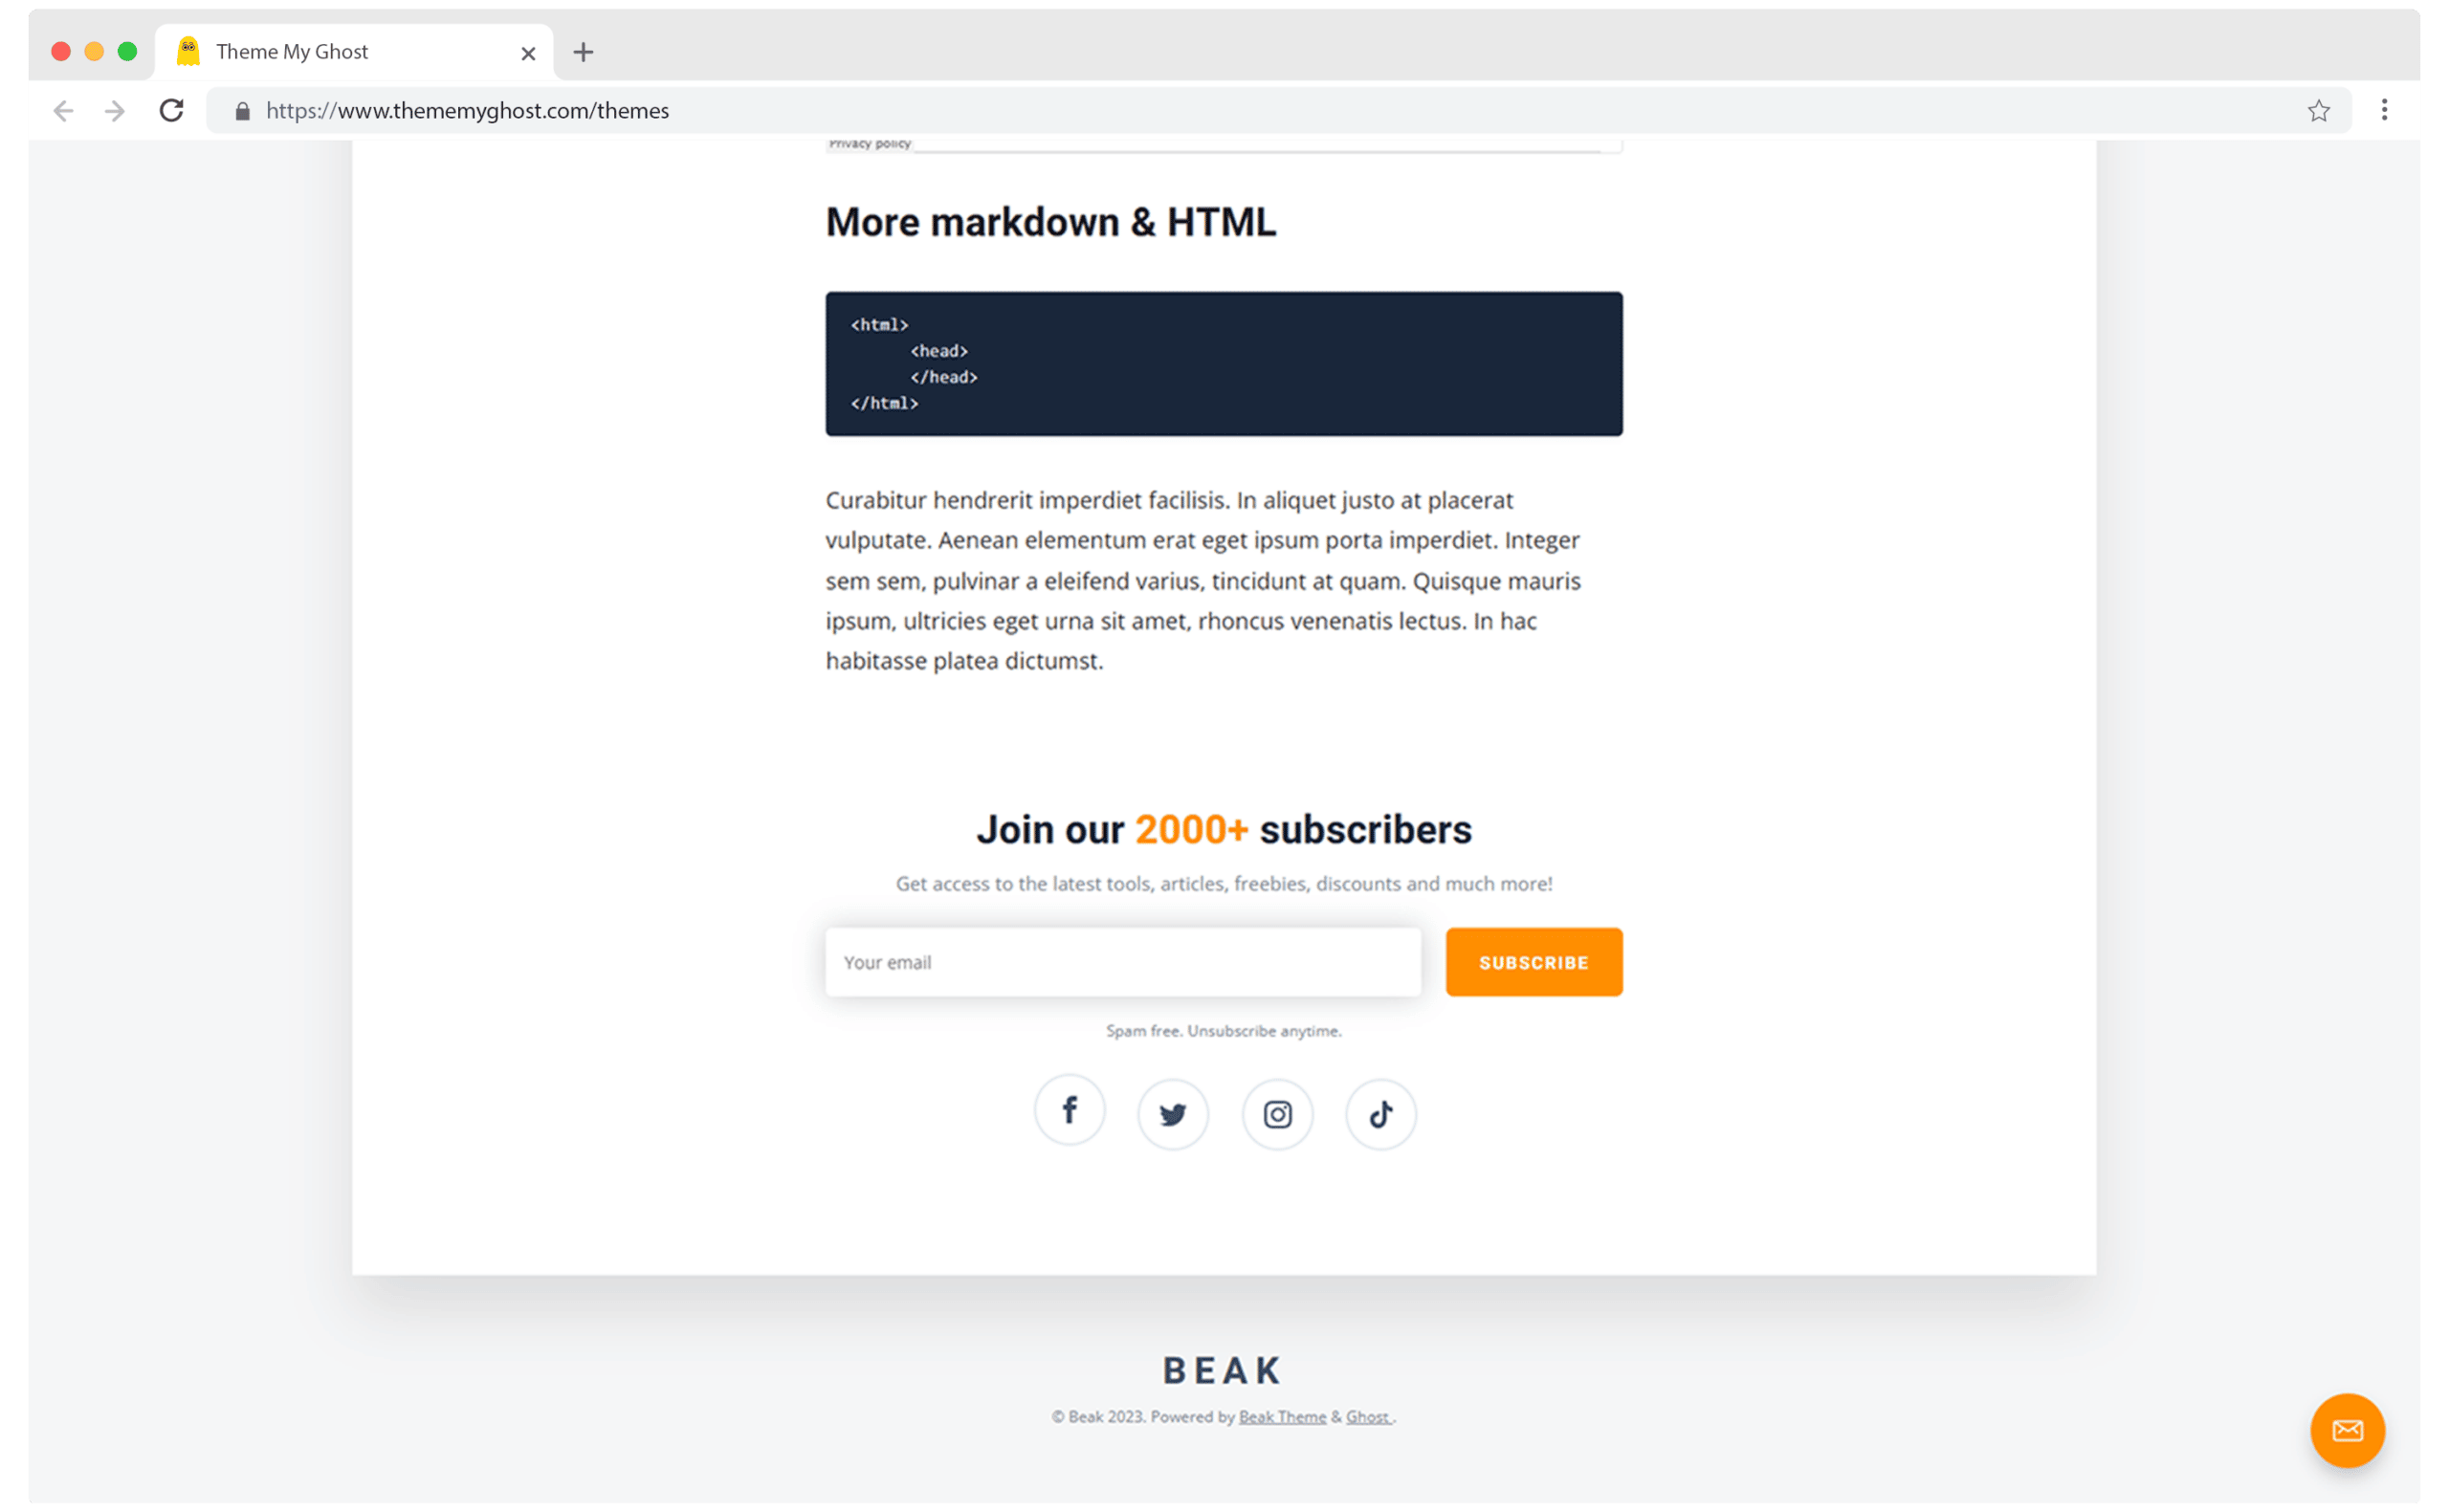 Beak A Simple Paid Ghost Newsletter Theme with Ability to Show Resources and Guides 16